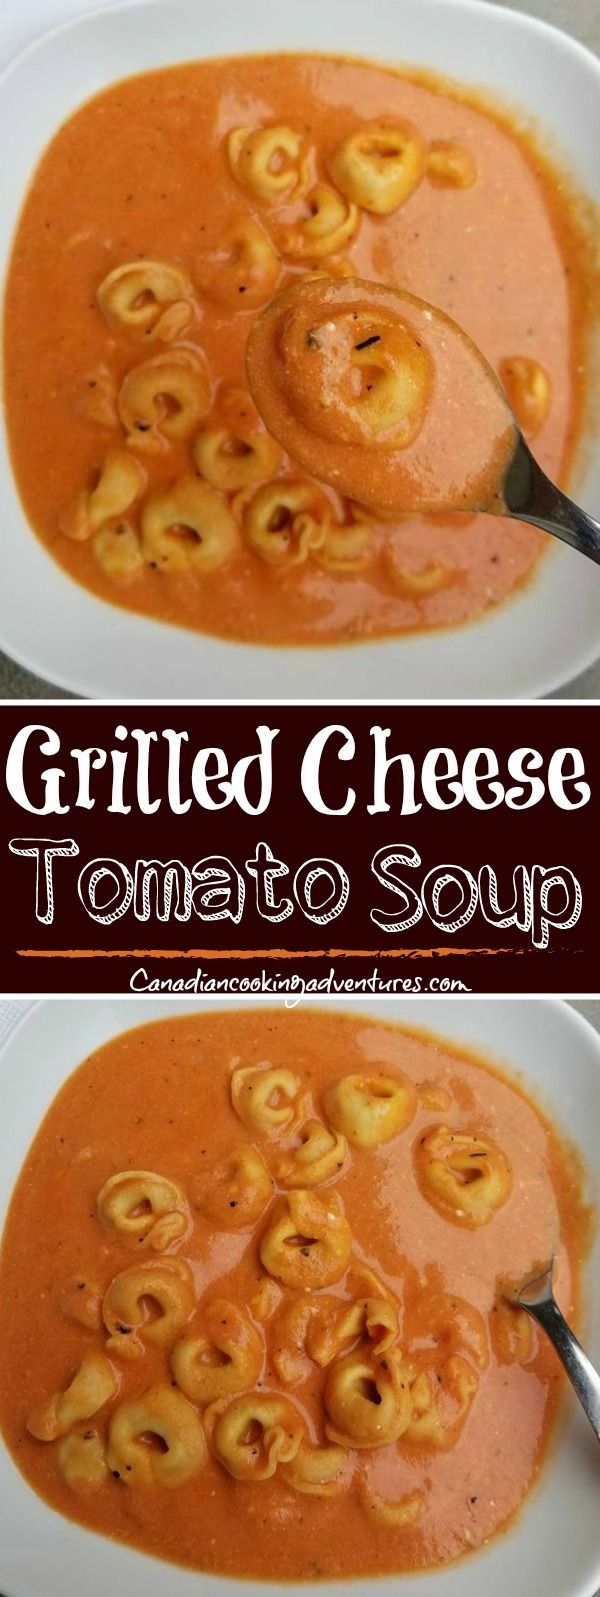 Grilled Cheese Tomato Tortellini Soup -   15 healthy recipes Soup grilled cheeses ideas